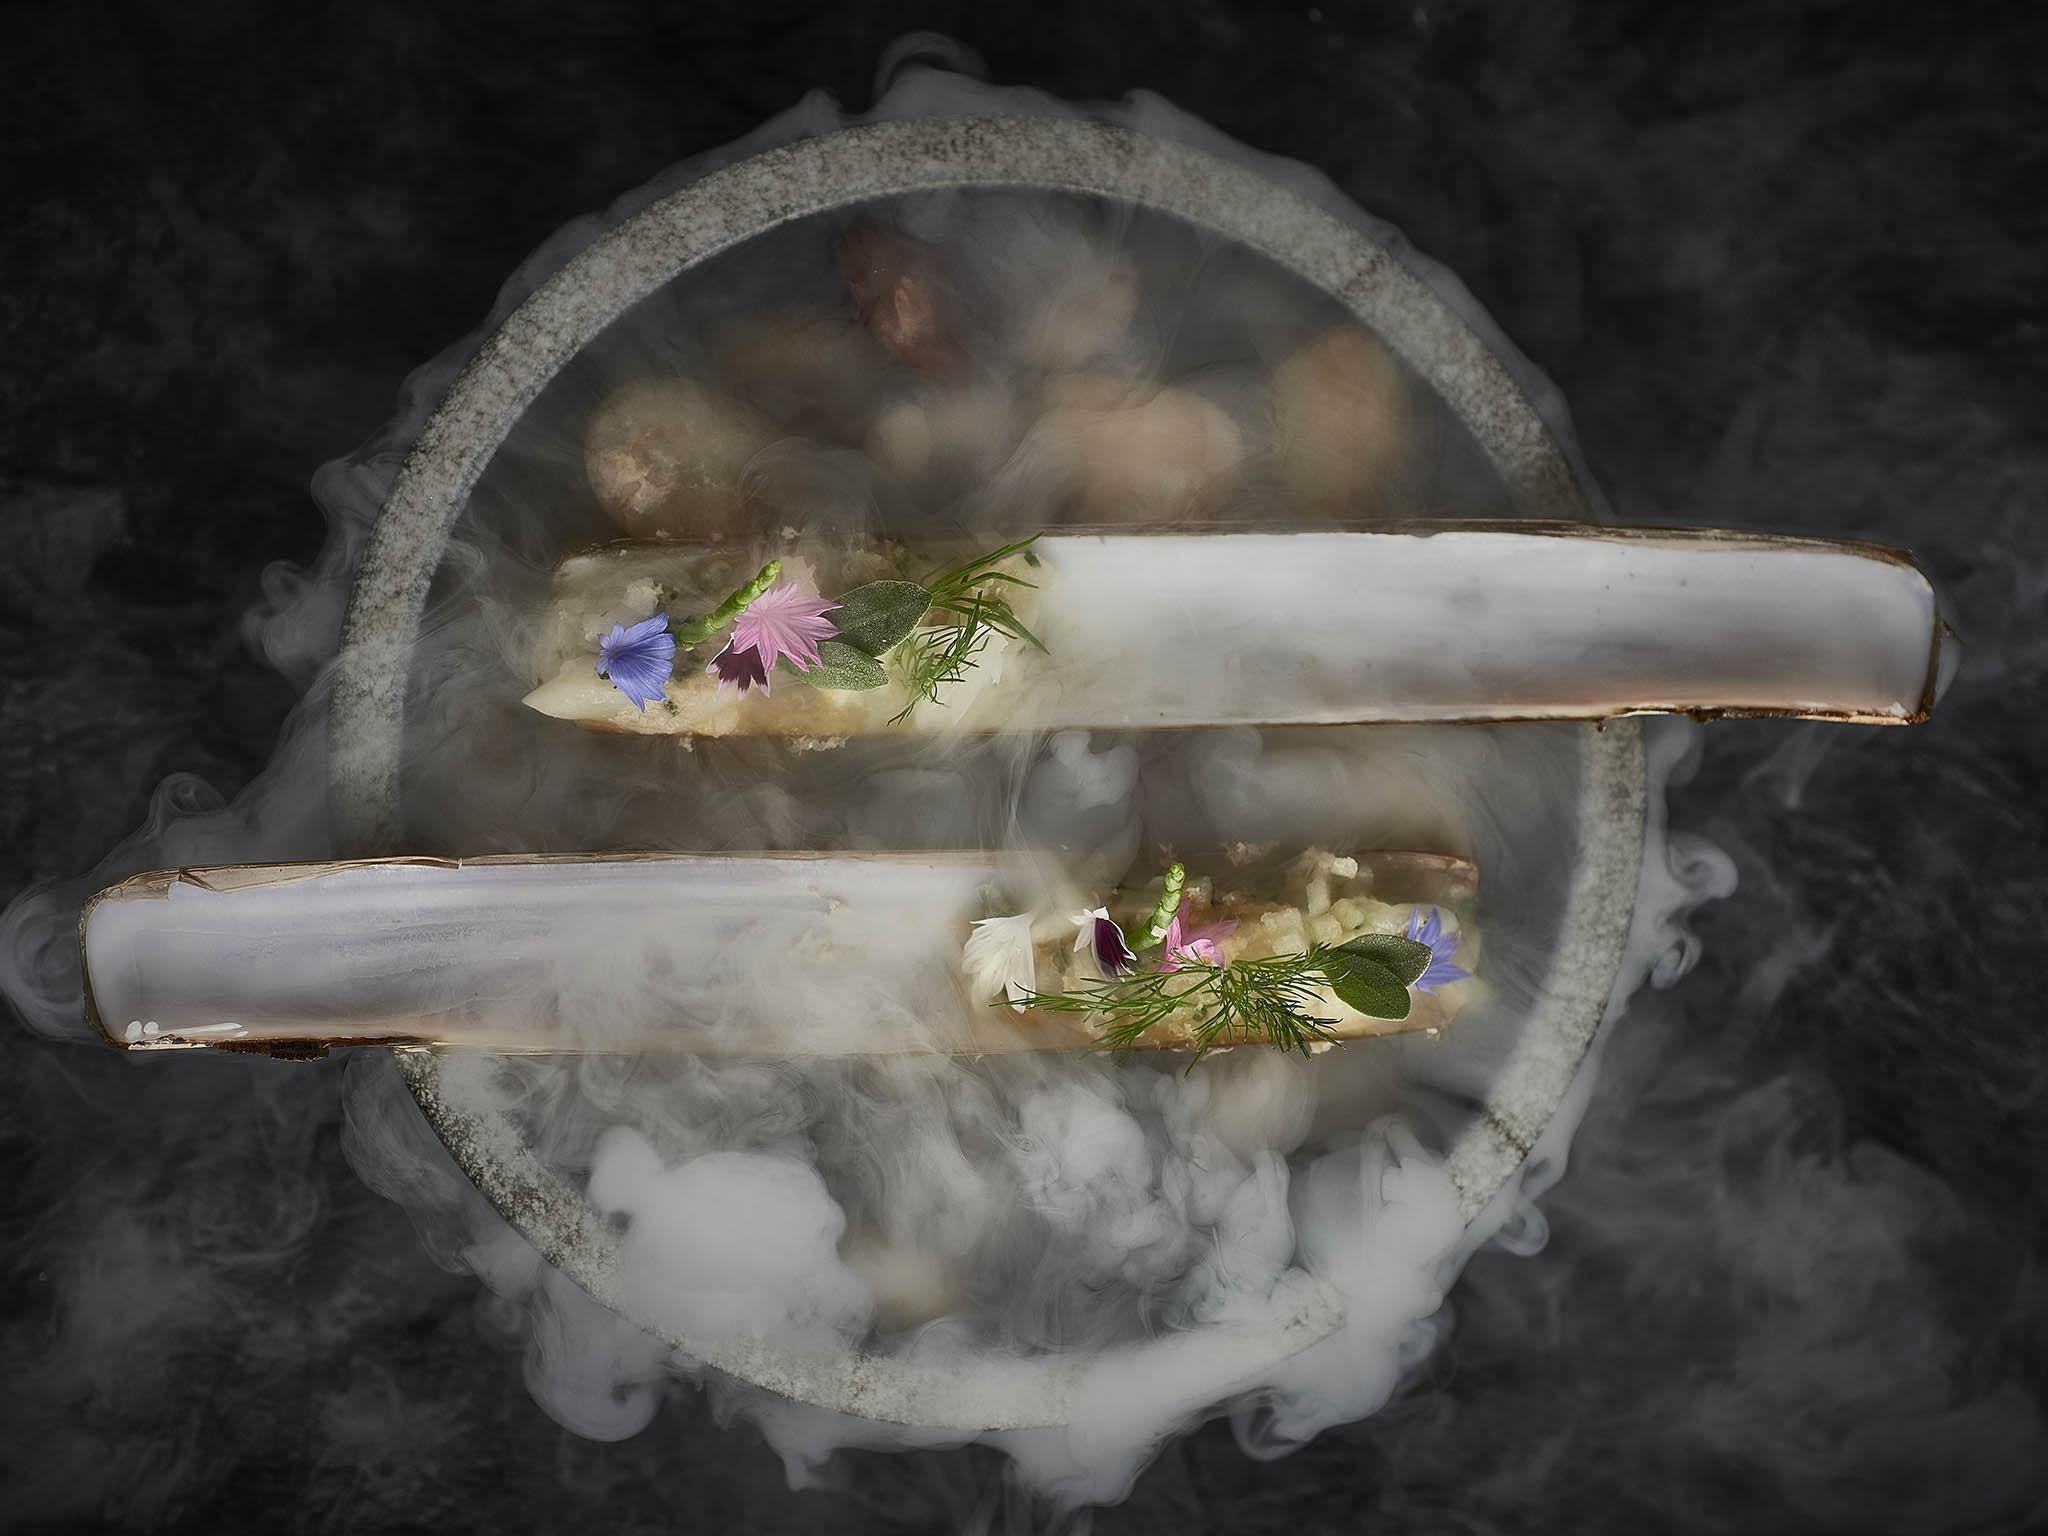 Razor clams – just a high-end snack, y’know